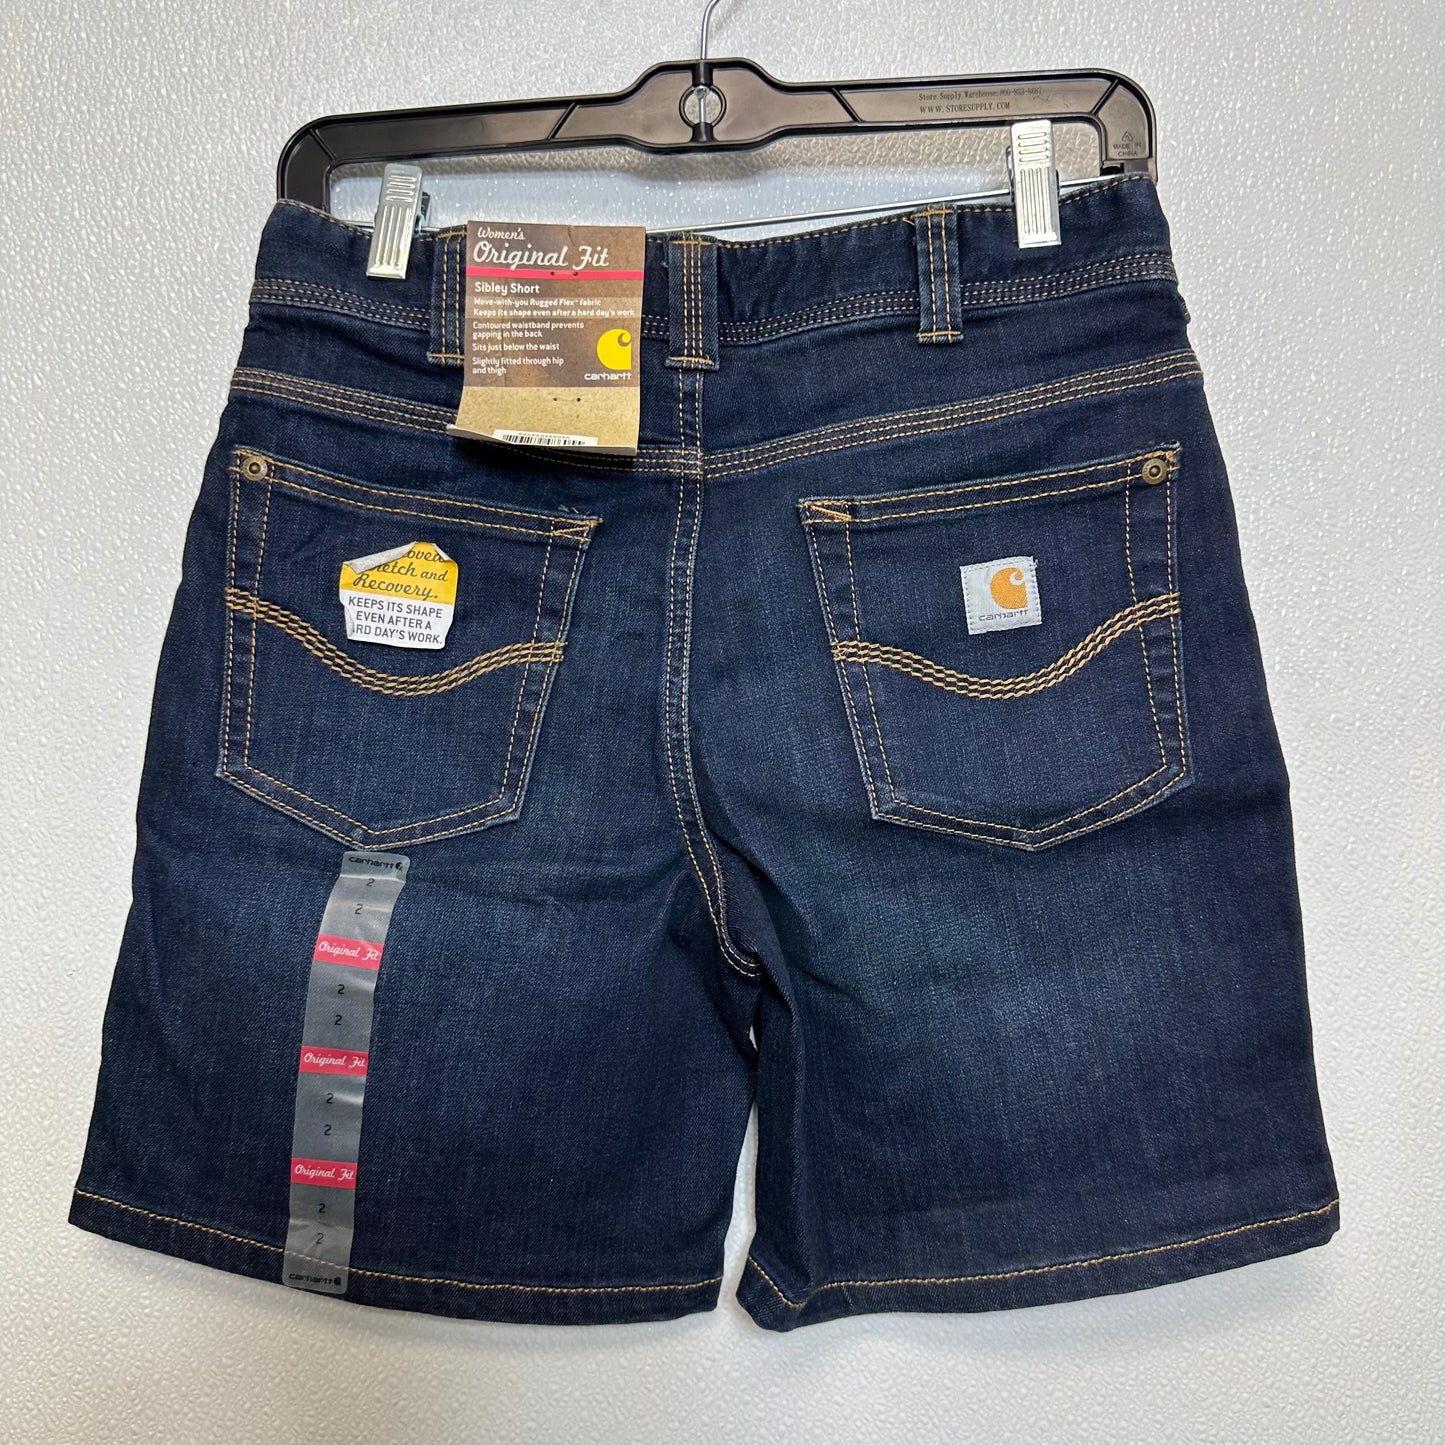 Shorts By Carhart  Size: 2